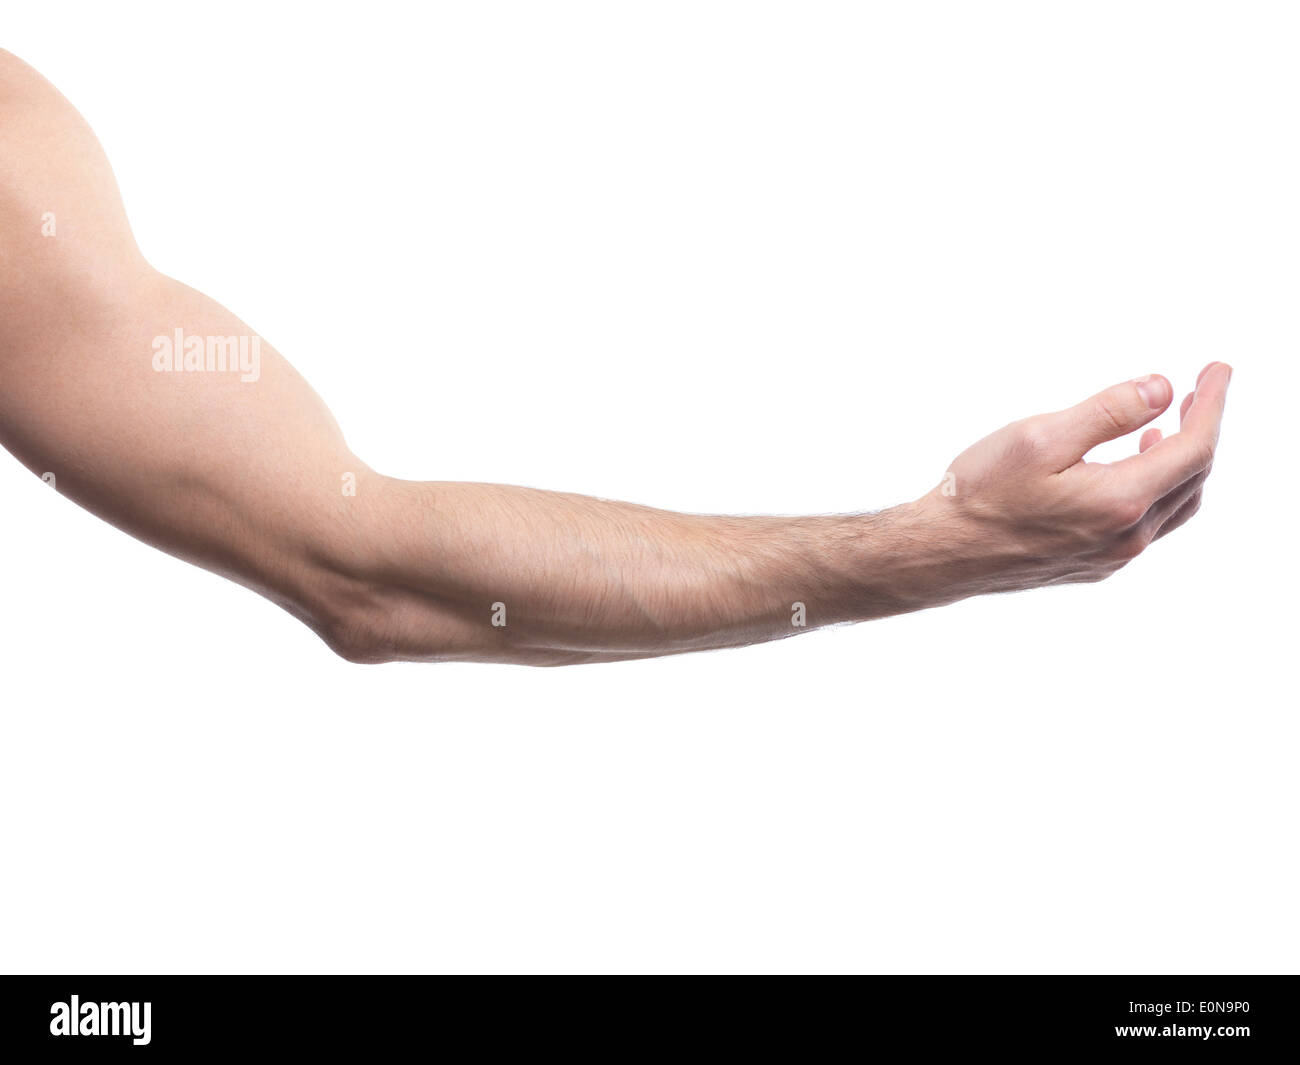 Man arm bent at an elbow with open palm facing up isolated on white background Stock Photo